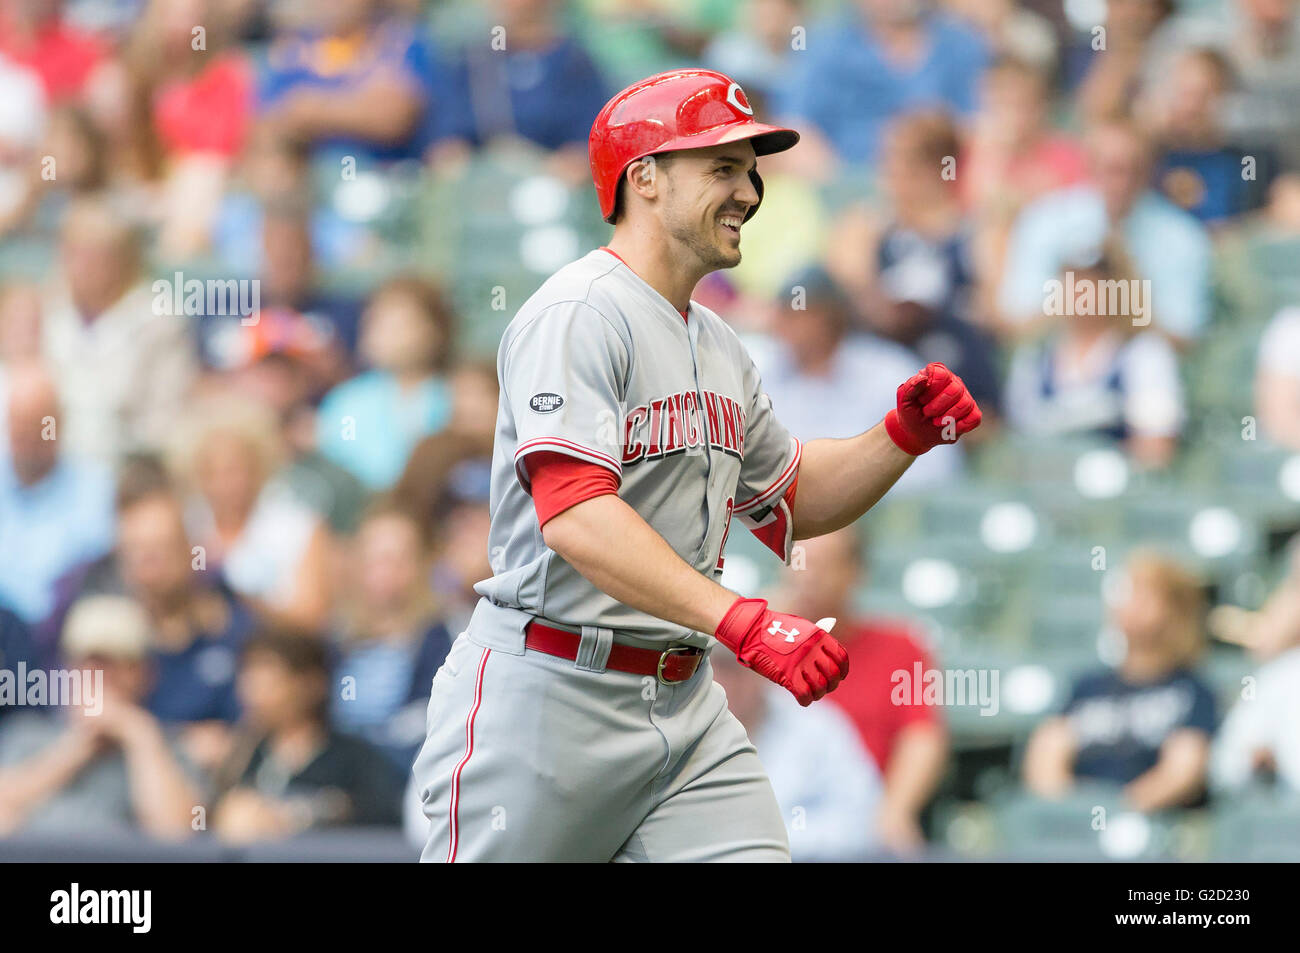 Milwaukee, WI, USA. 27th May, 2016. Cincinnati Reds left fielder Adam Duvall #23 crosses home plate after hitting a three run homer to left field in the first inning of the Major League Baseball game between the Milwaukee Brewers and the Cincinnati Reds at Miller Park in Milwaukee, WI. Reds lead the Brewers 3-0. John Fisher/CSM/Alamy Live News Stock Photo